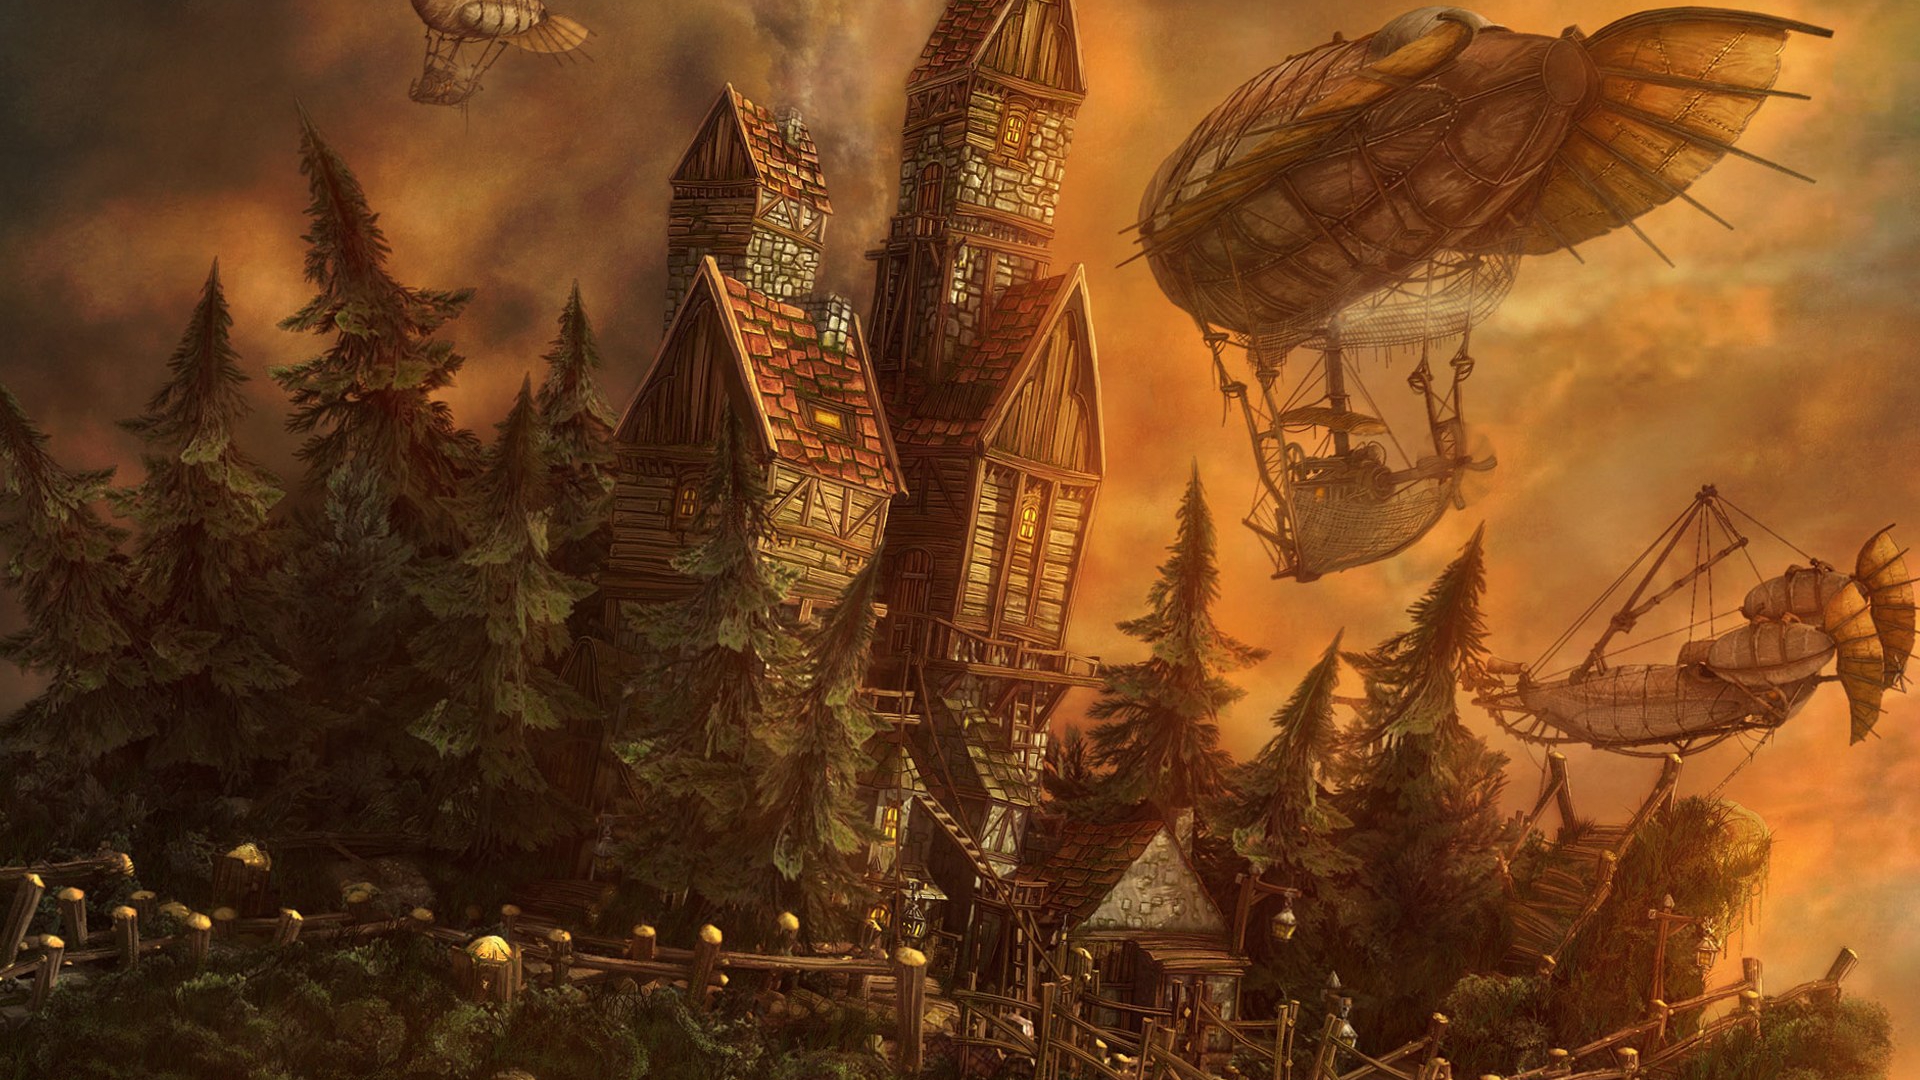 Steampunk Wallpaper 1600x900 Images amp Pictures   Becuo